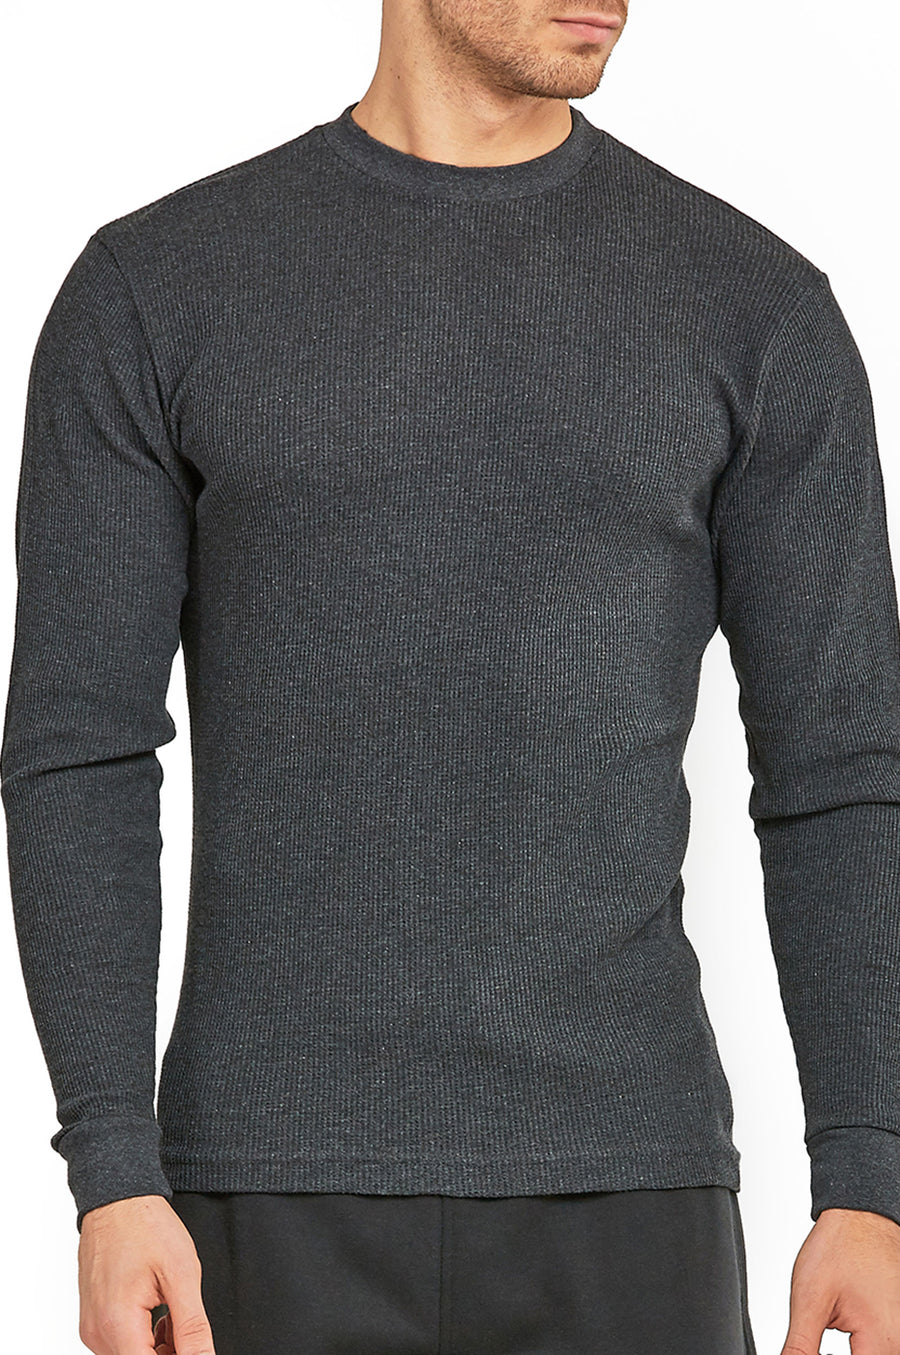 Men's Classic Waffle Knit Heavyweight Cotton Long Sleeve Thermal T-Shirt  Top - Charcoal / S